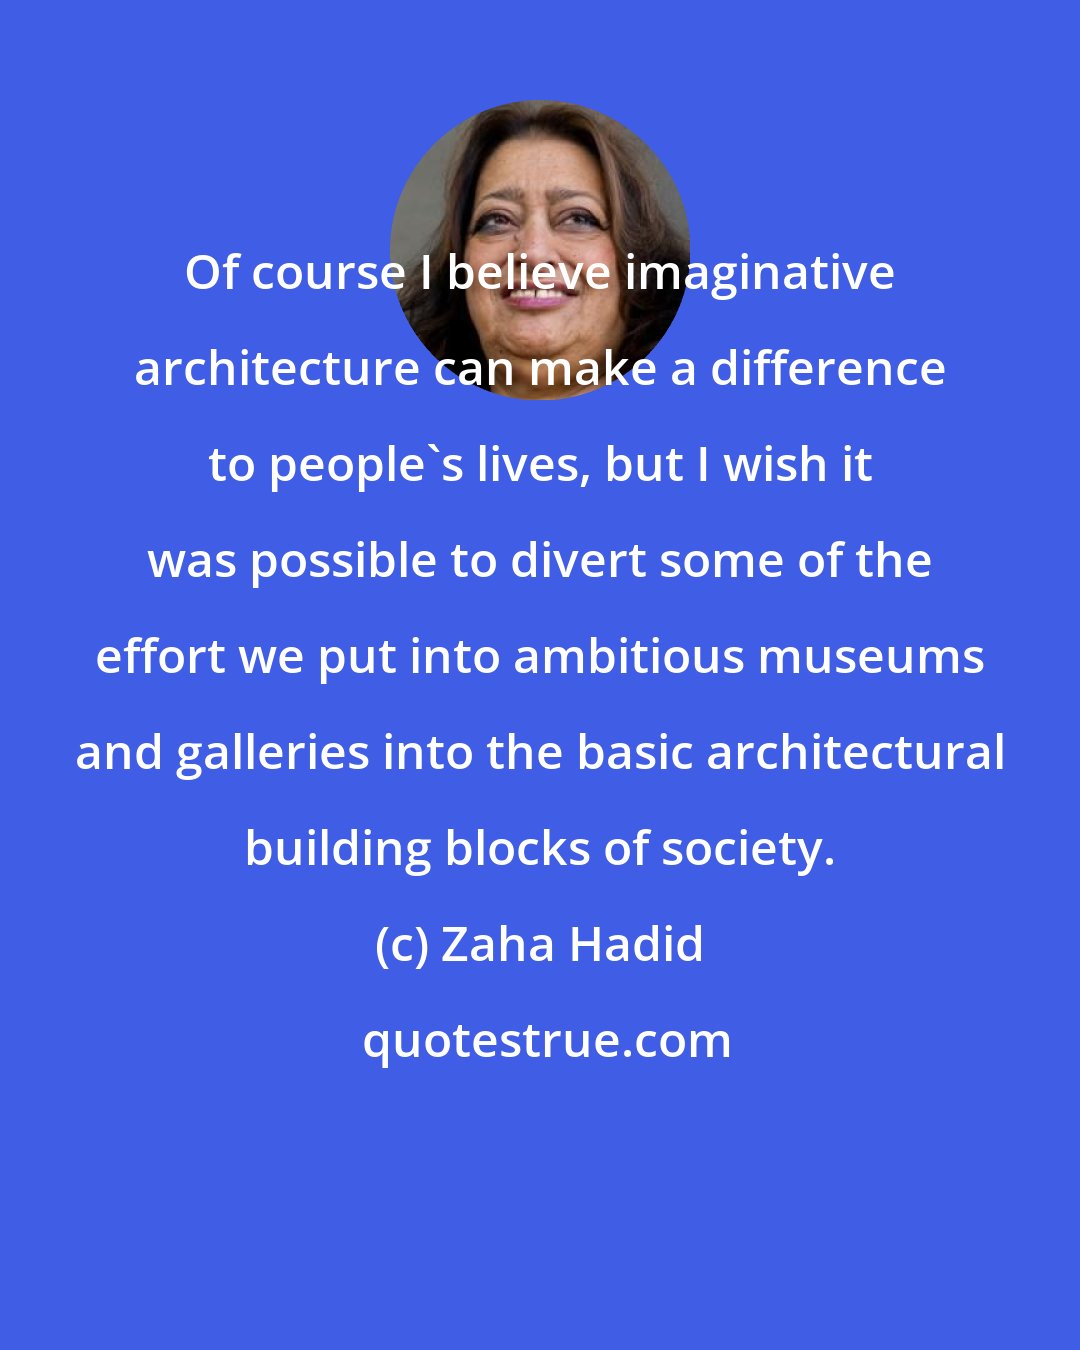 Zaha Hadid: Of course I believe imaginative architecture can make a difference to people's lives, but I wish it was possible to divert some of the effort we put into ambitious museums and galleries into the basic architectural building blocks of society.